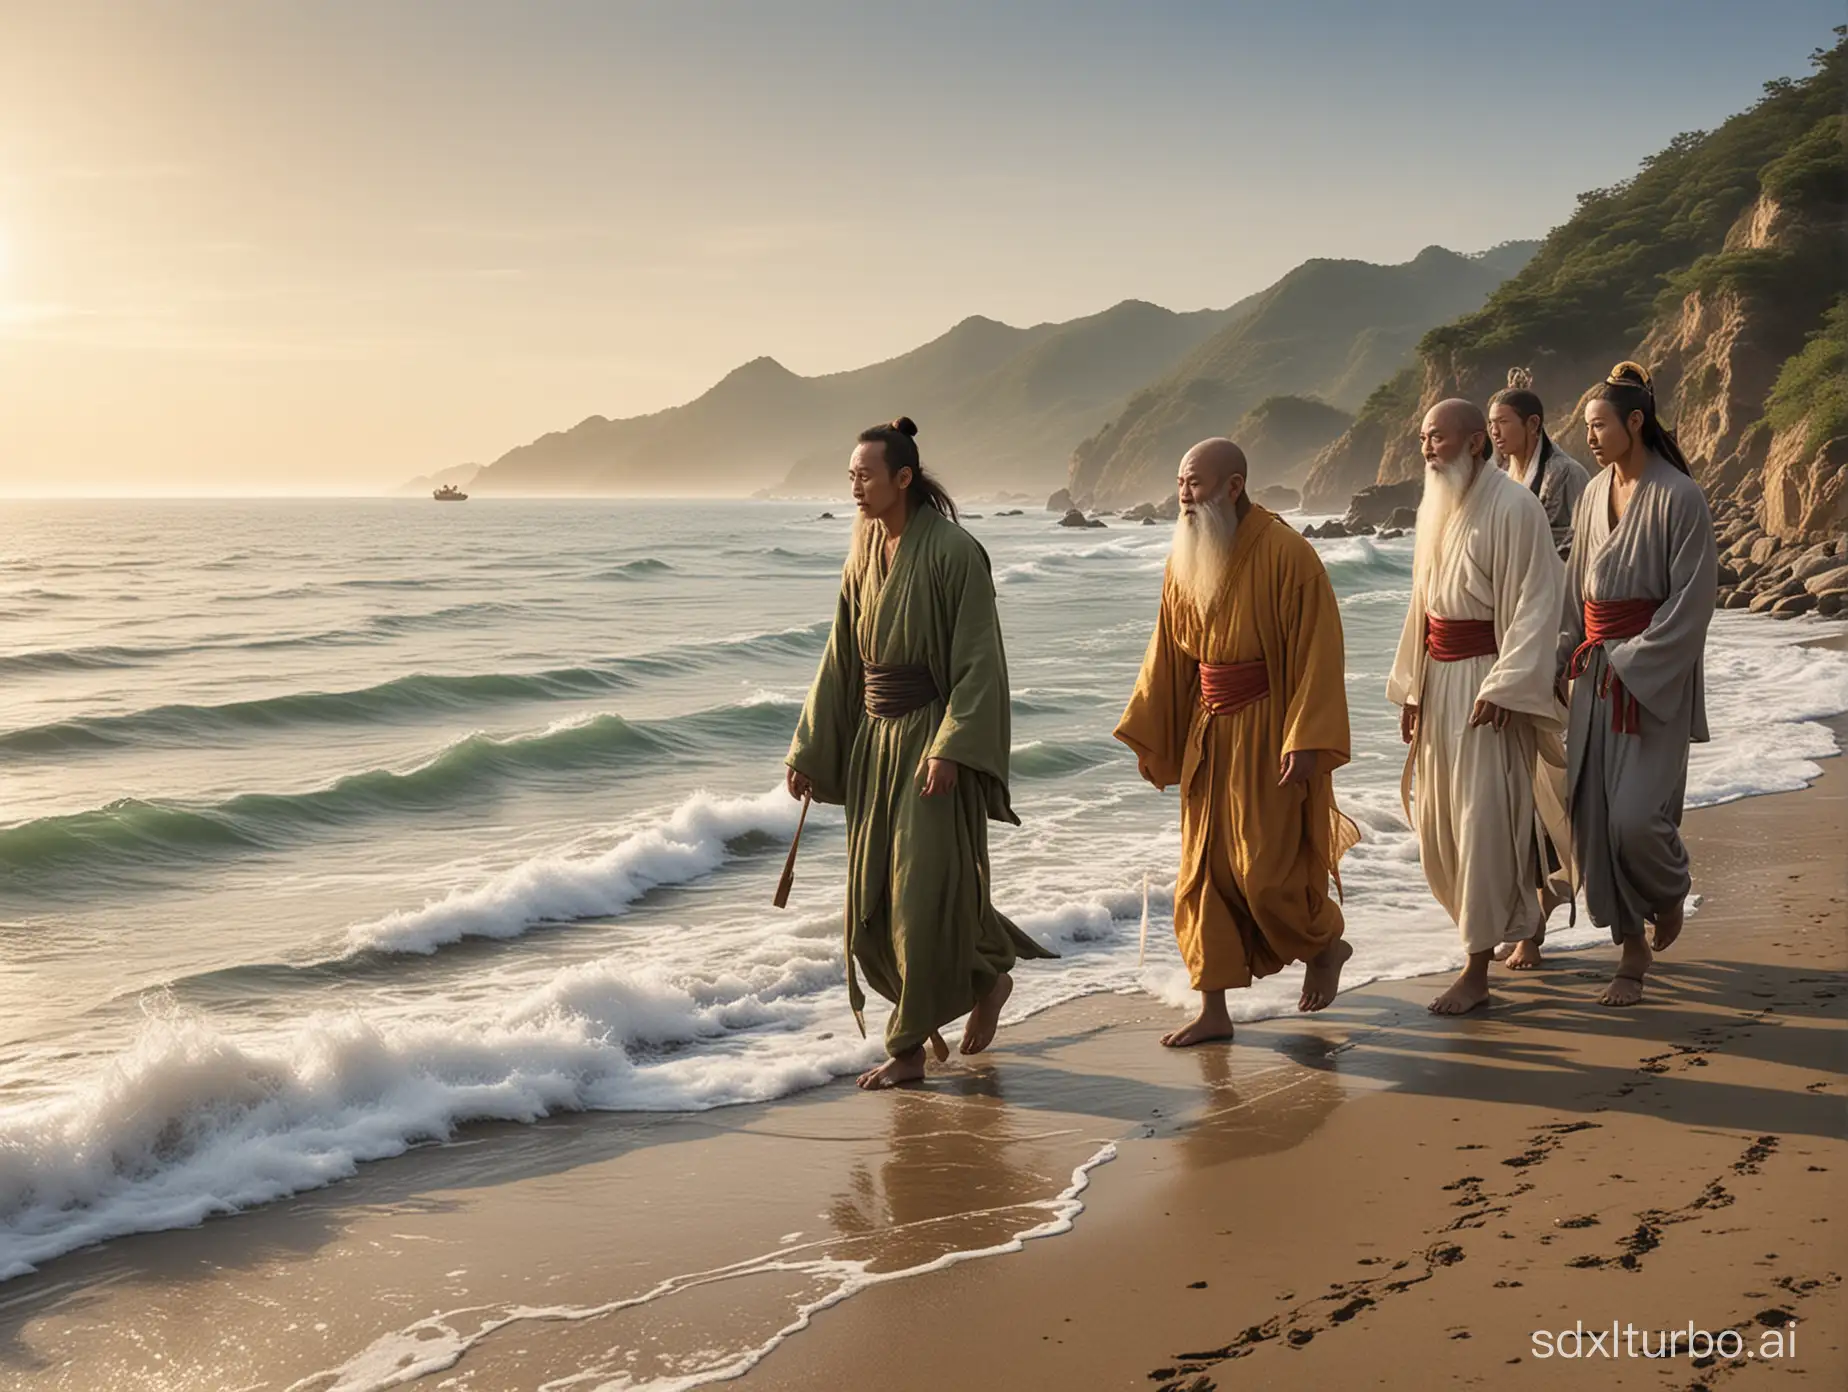 The four disciples of Journey to the West walk by the seaside.